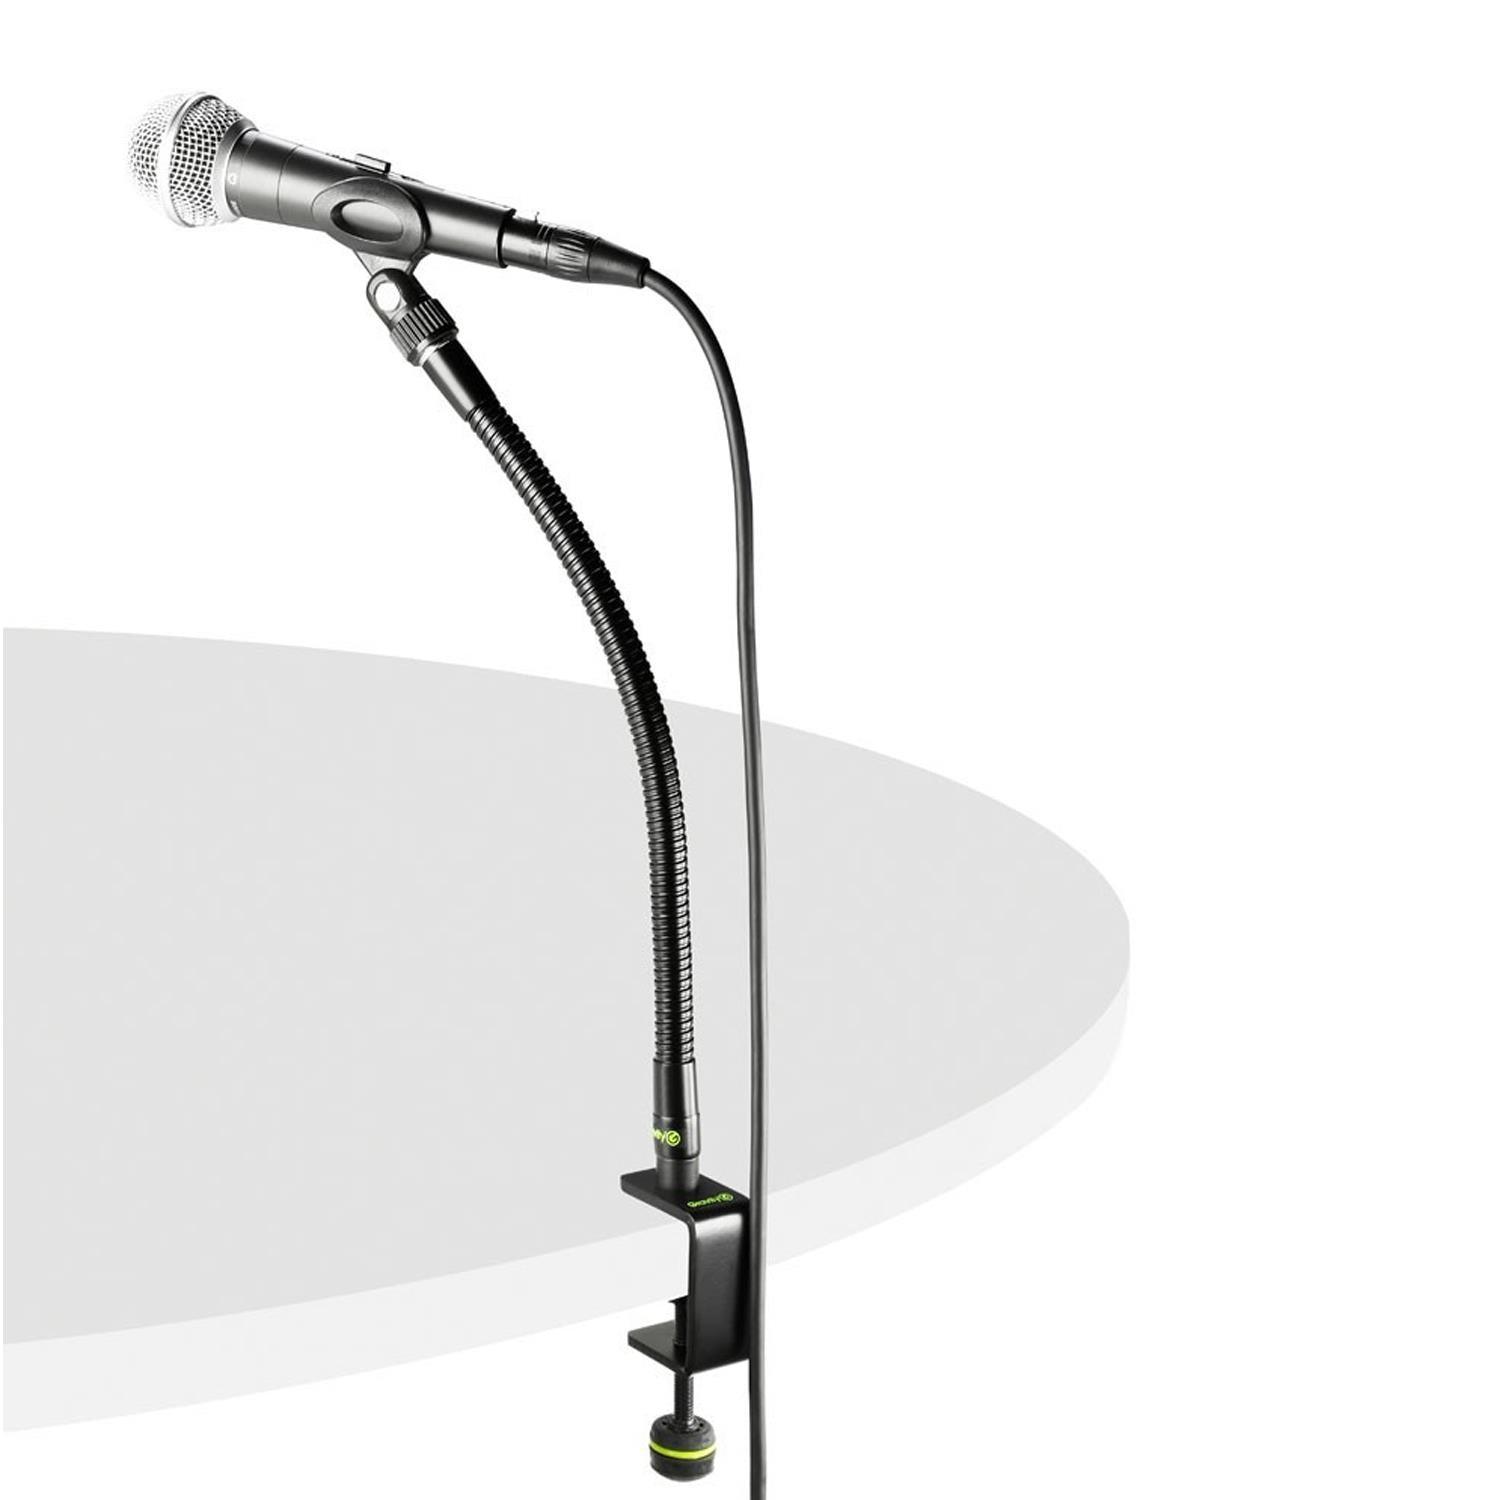 Gravity MS TM 1 B Microphone Table Clamp - DY Pro Audio